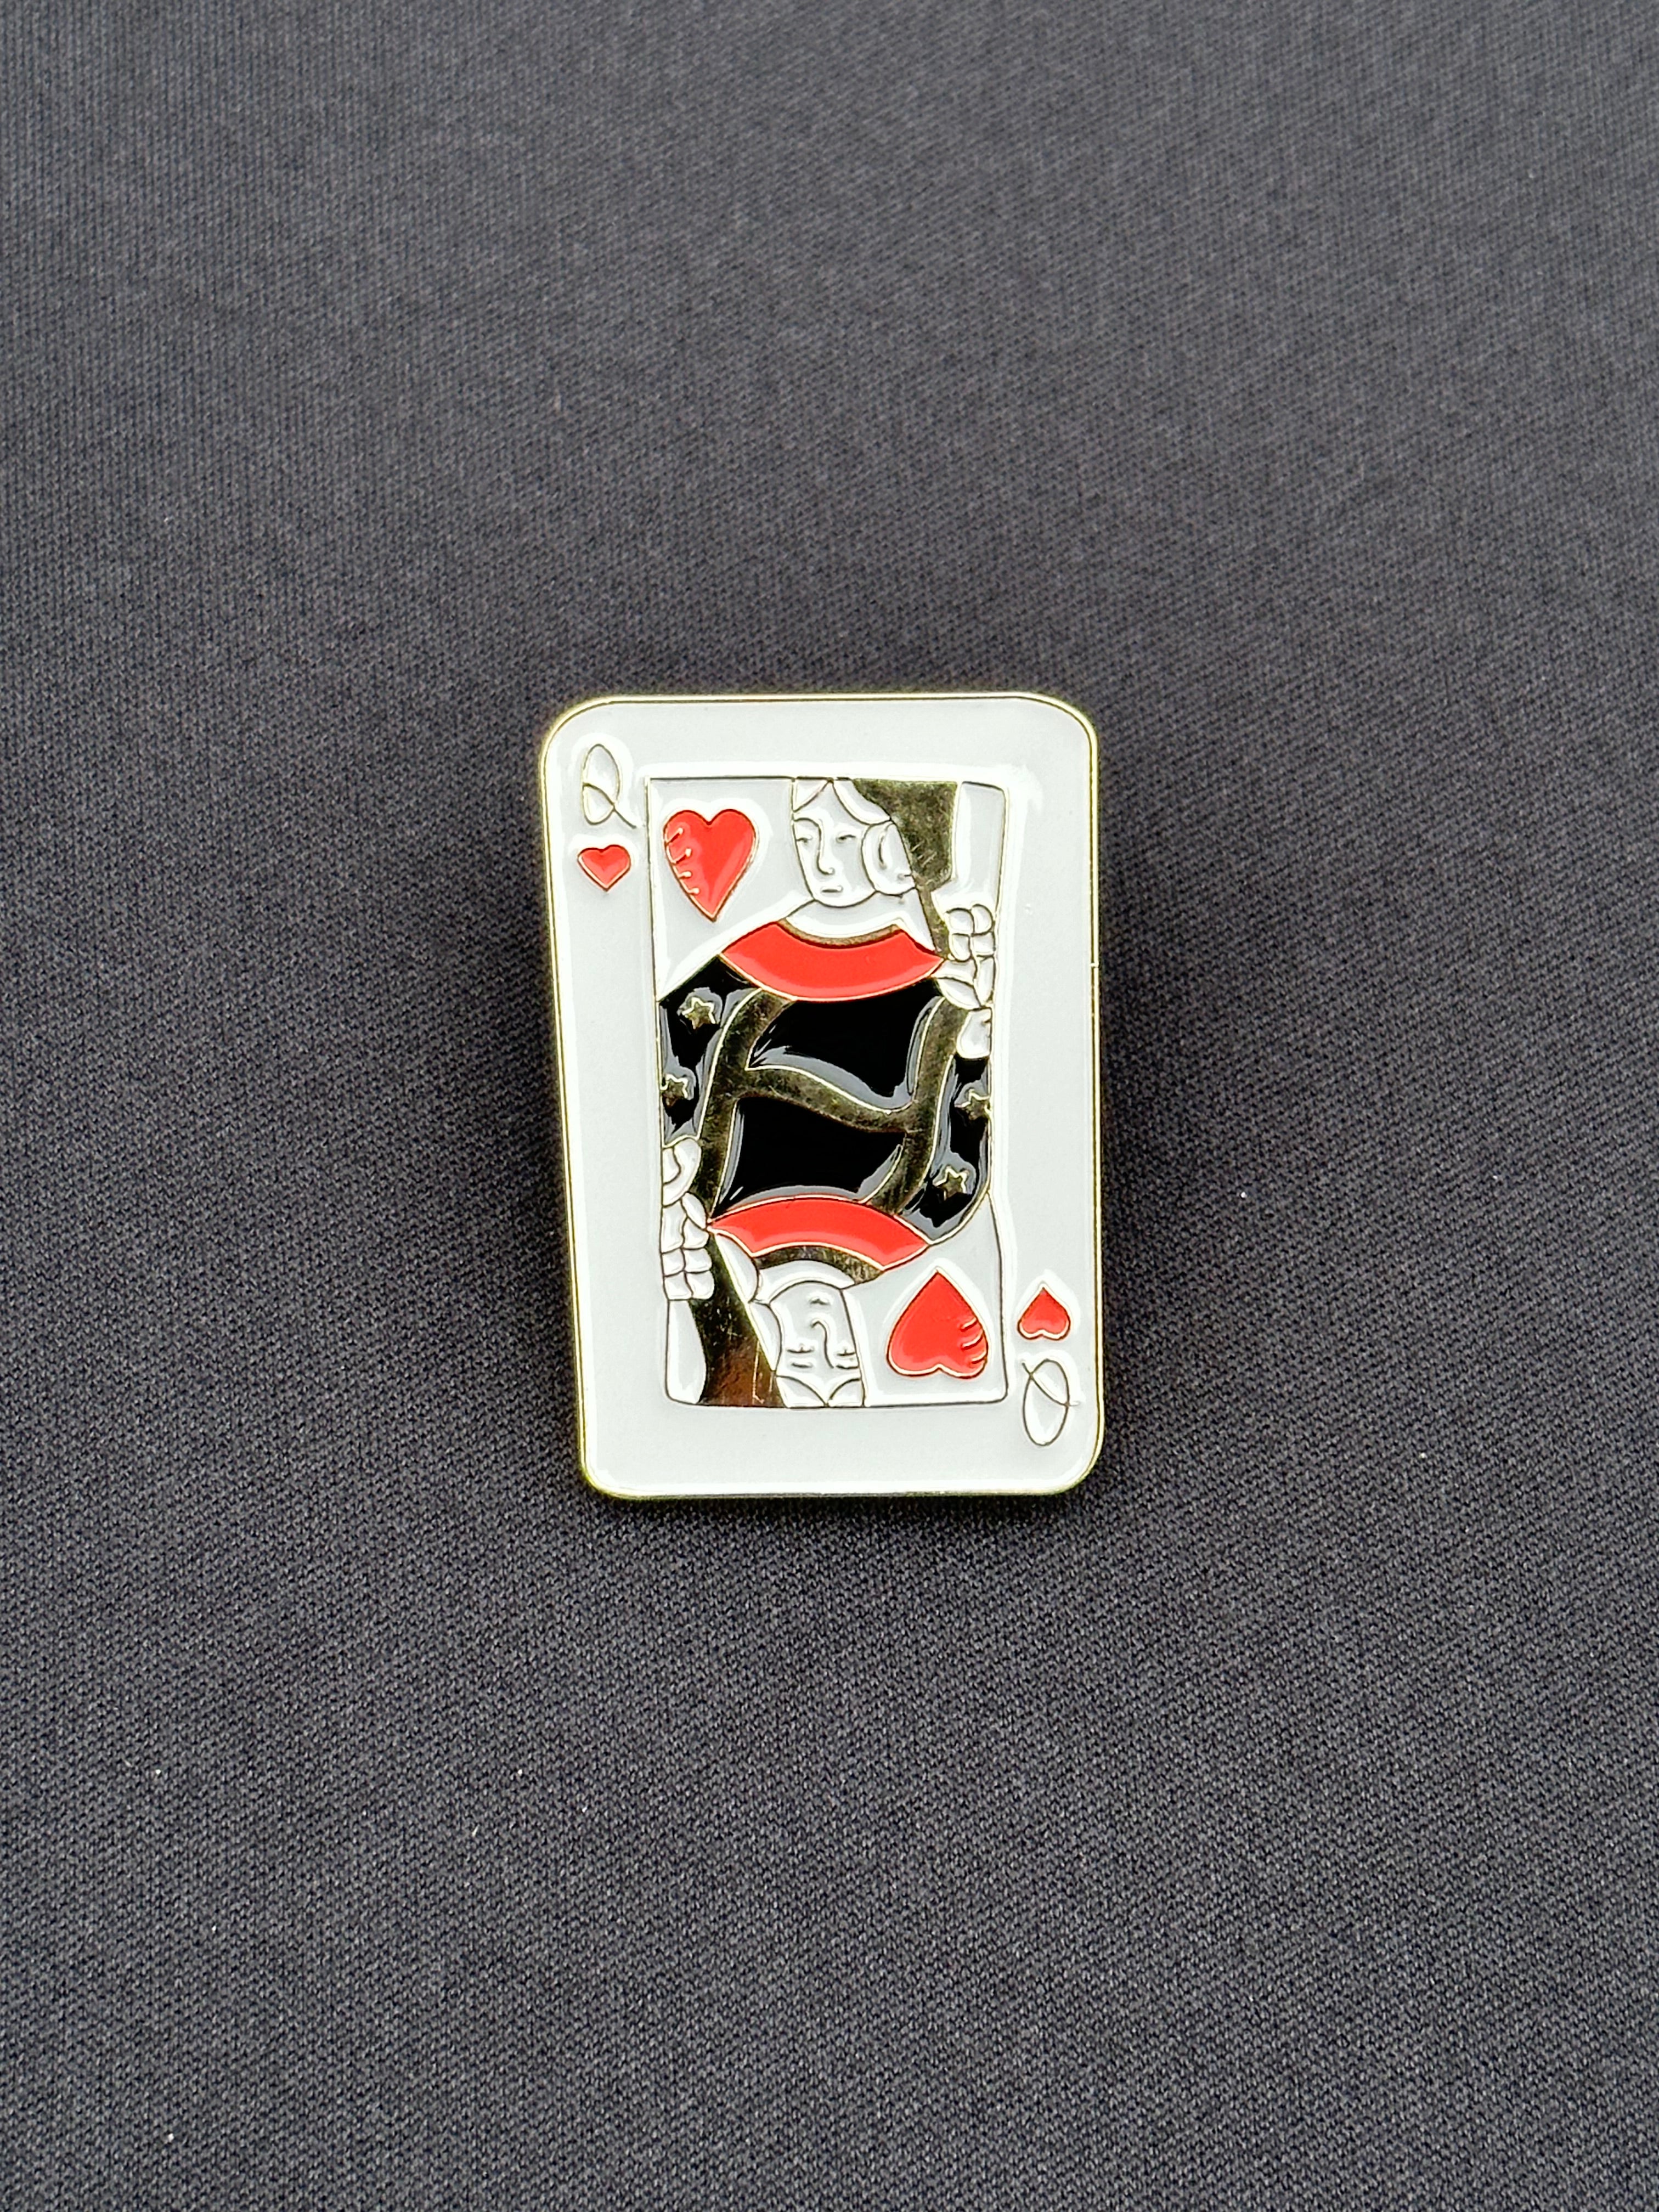 *NEW DECK OF CARDS "THE QUEEN" EXCLUSIVE PIN VERY LIMITED